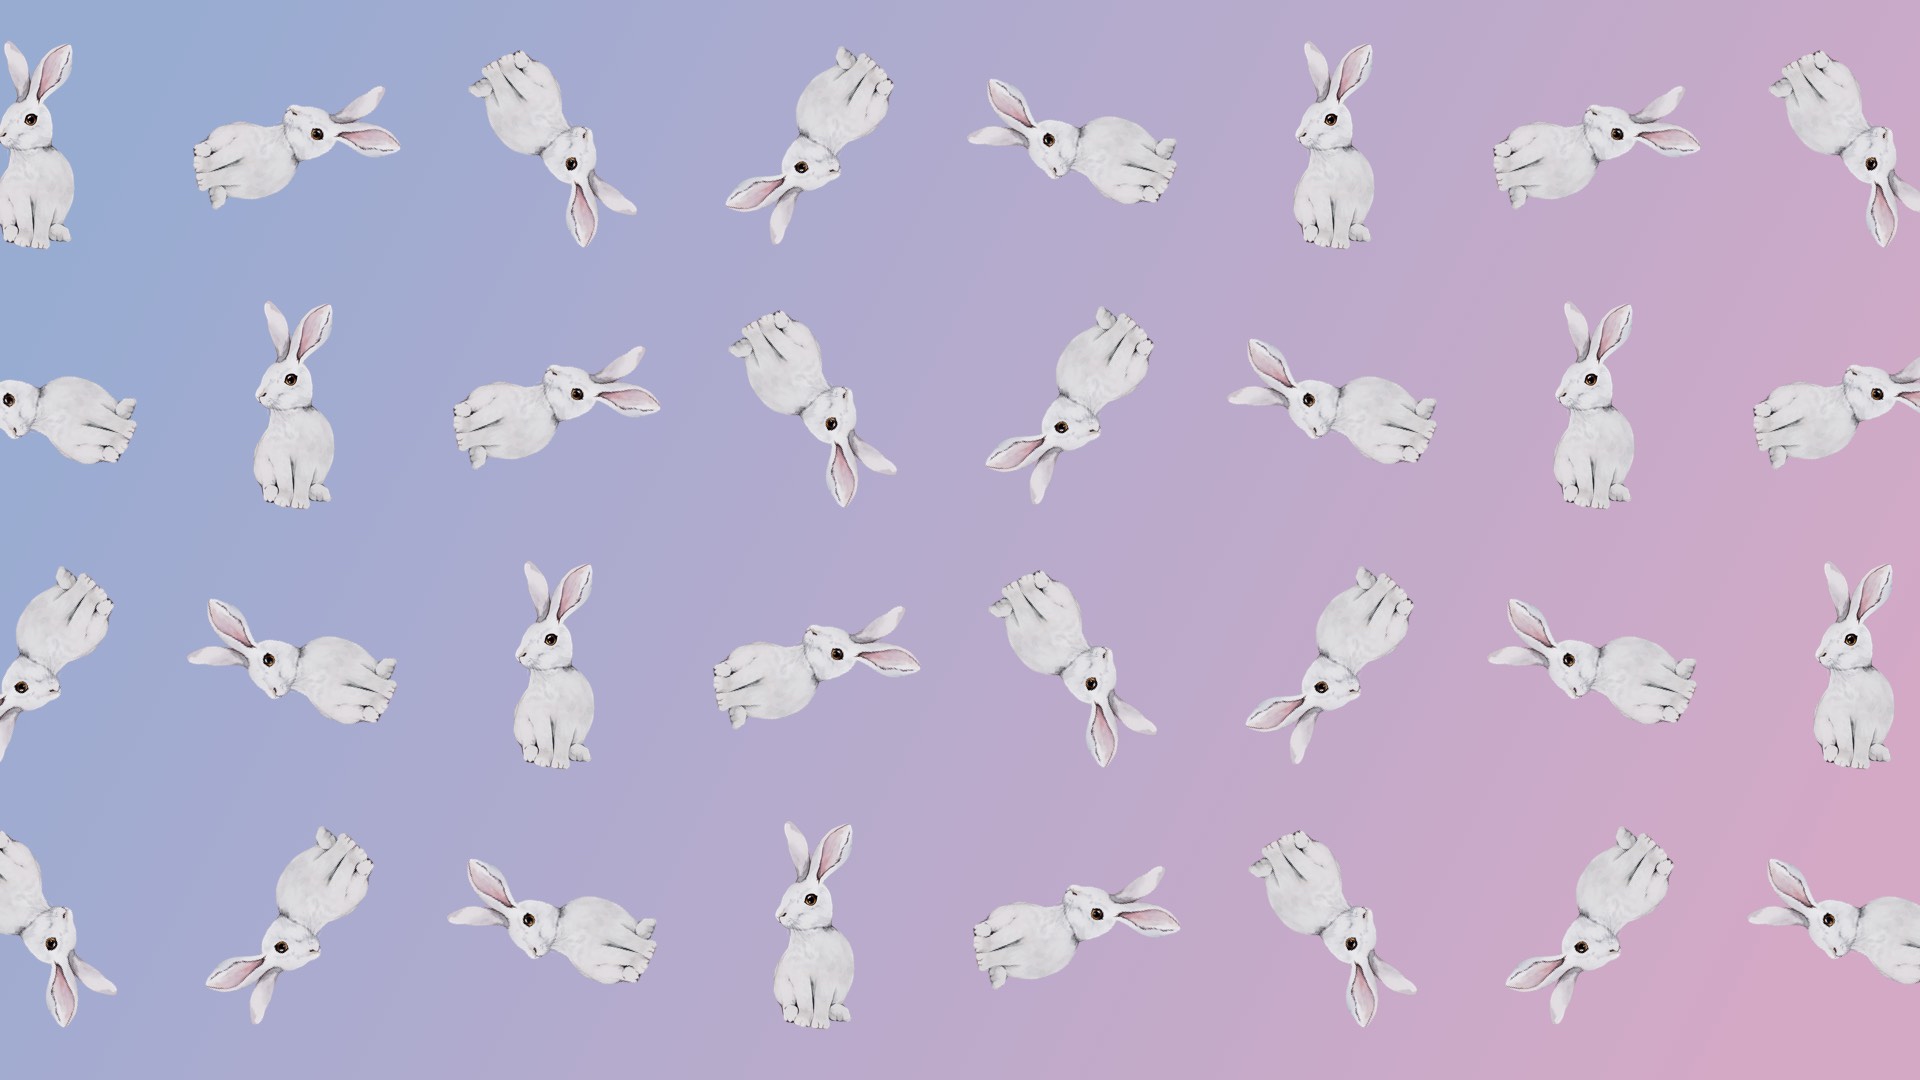 A Group Of White Rabbits Sitting Next To Each Other Zoom Backgrounds Template